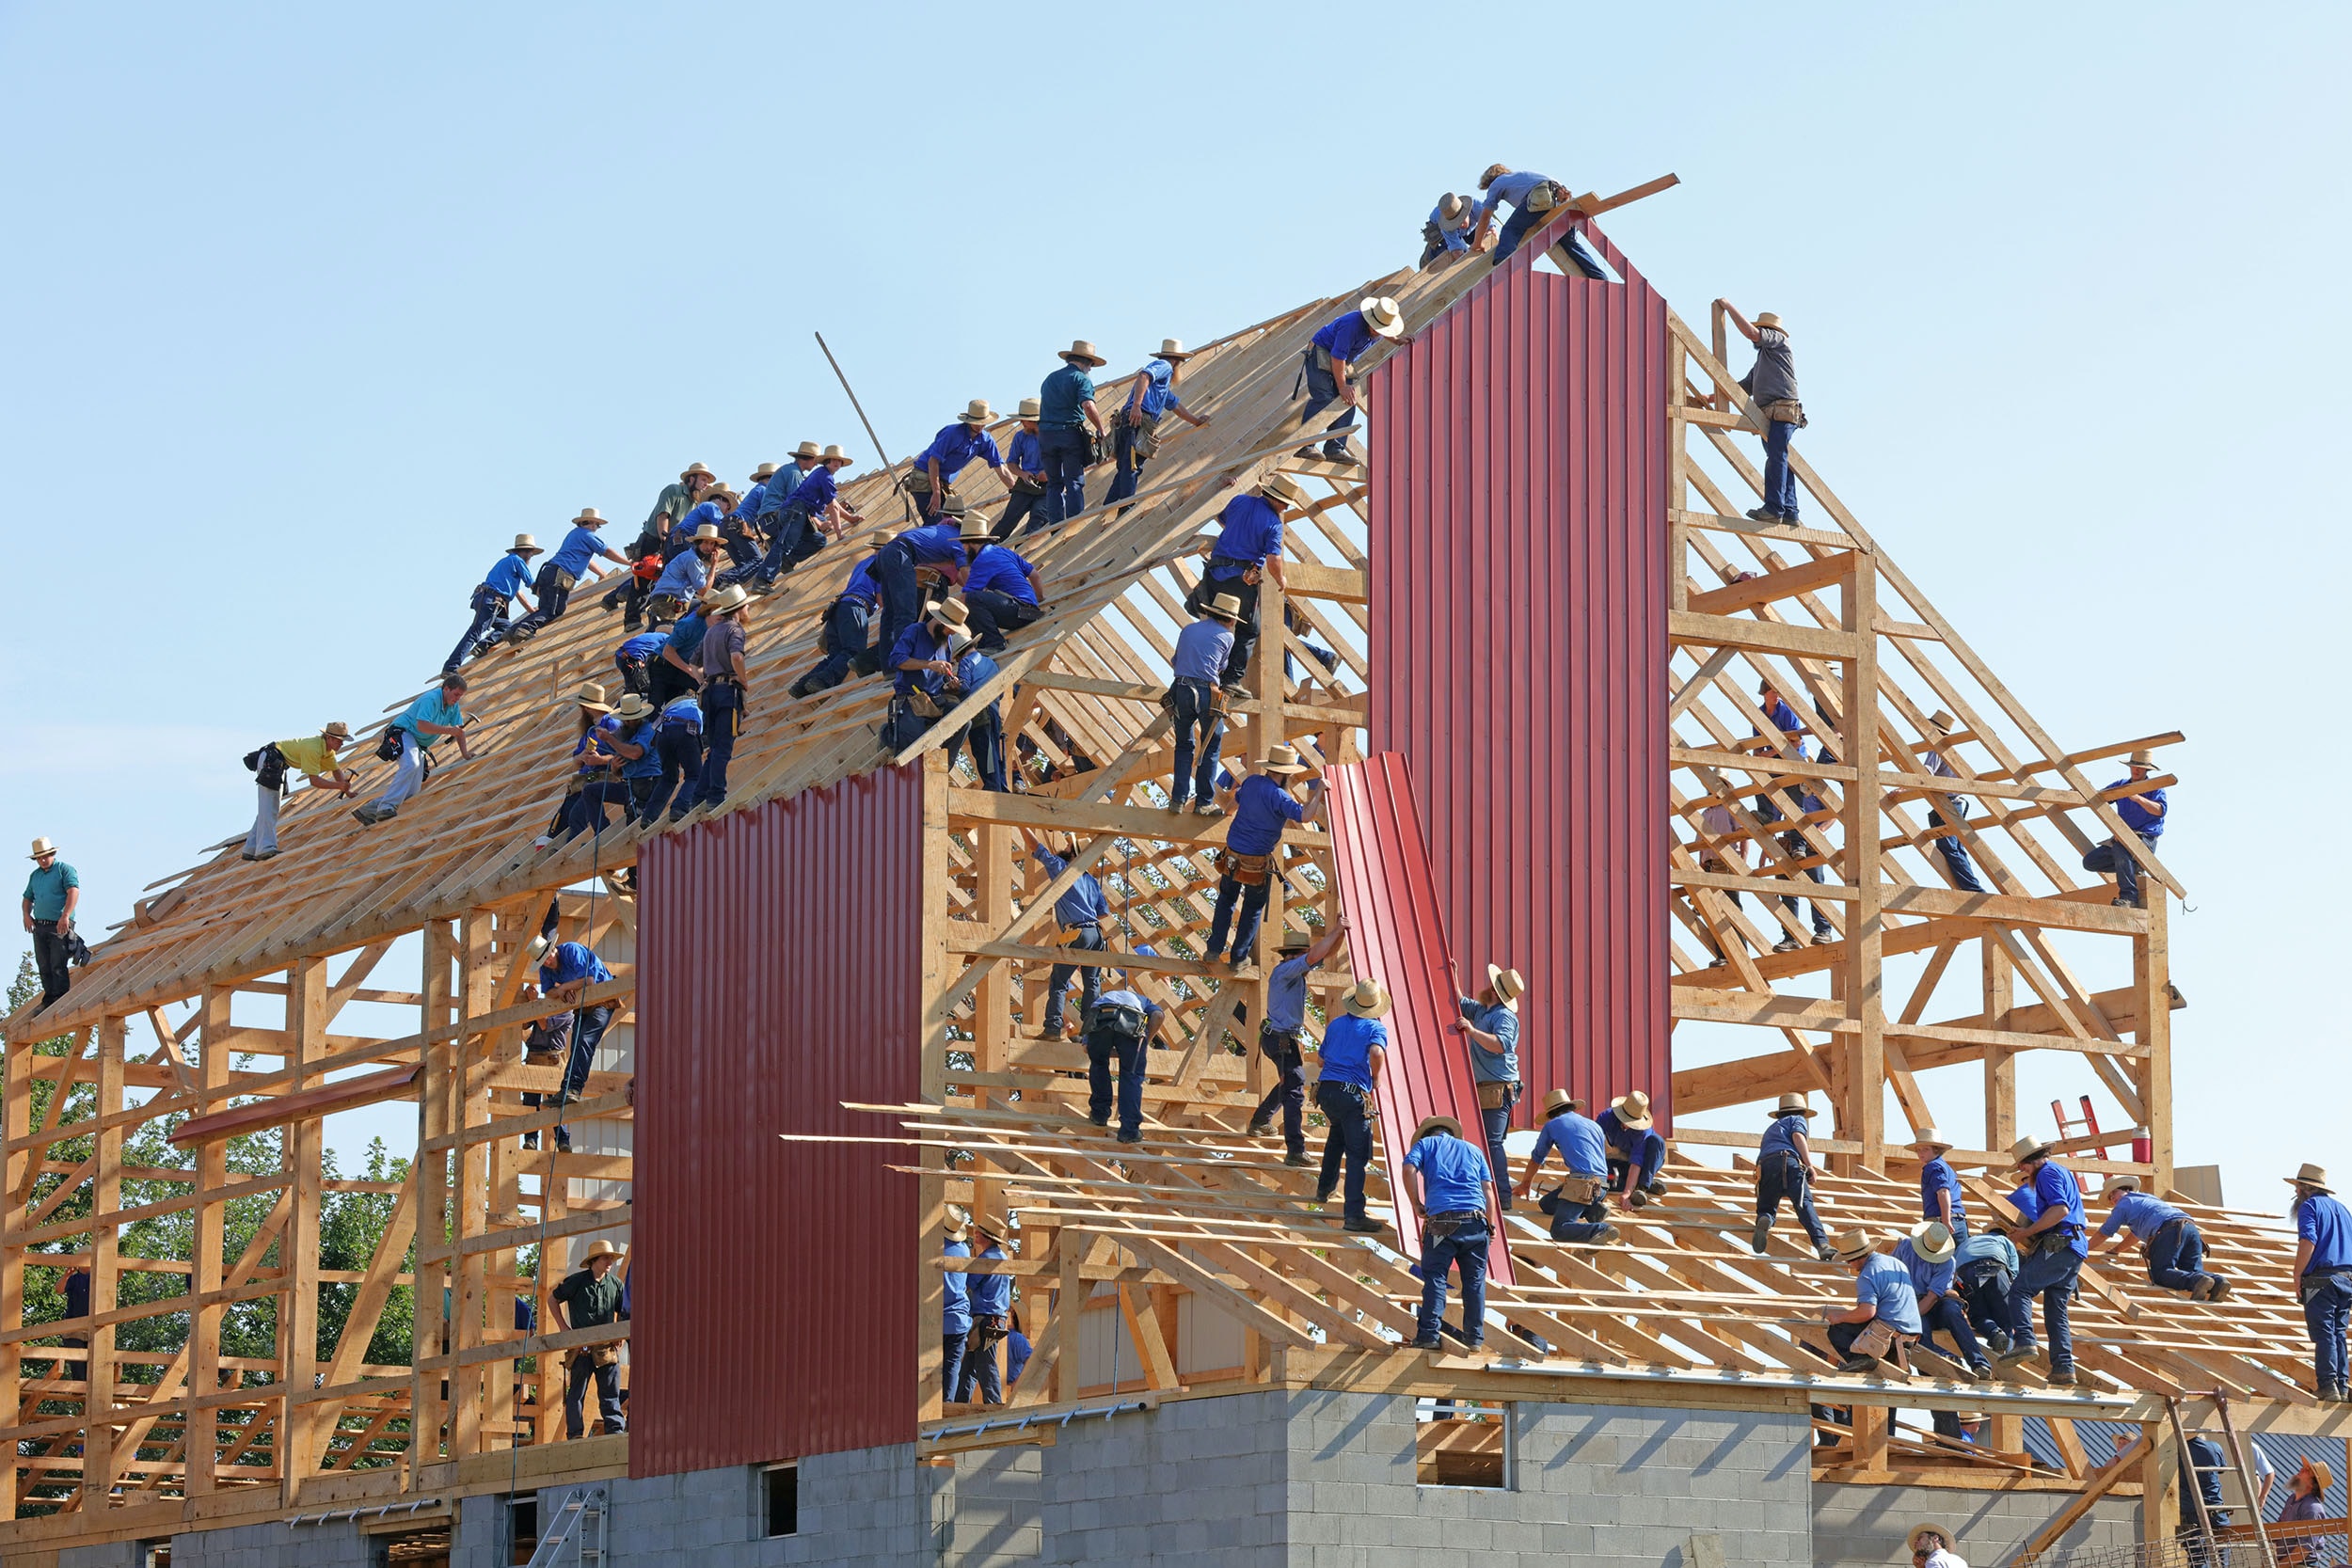 Image of a large group of people building a house together – all balanced on a wooden structure putting red panels onto it. This represents a culture of employee engagement. Image by Randy Fath on Unsplash.